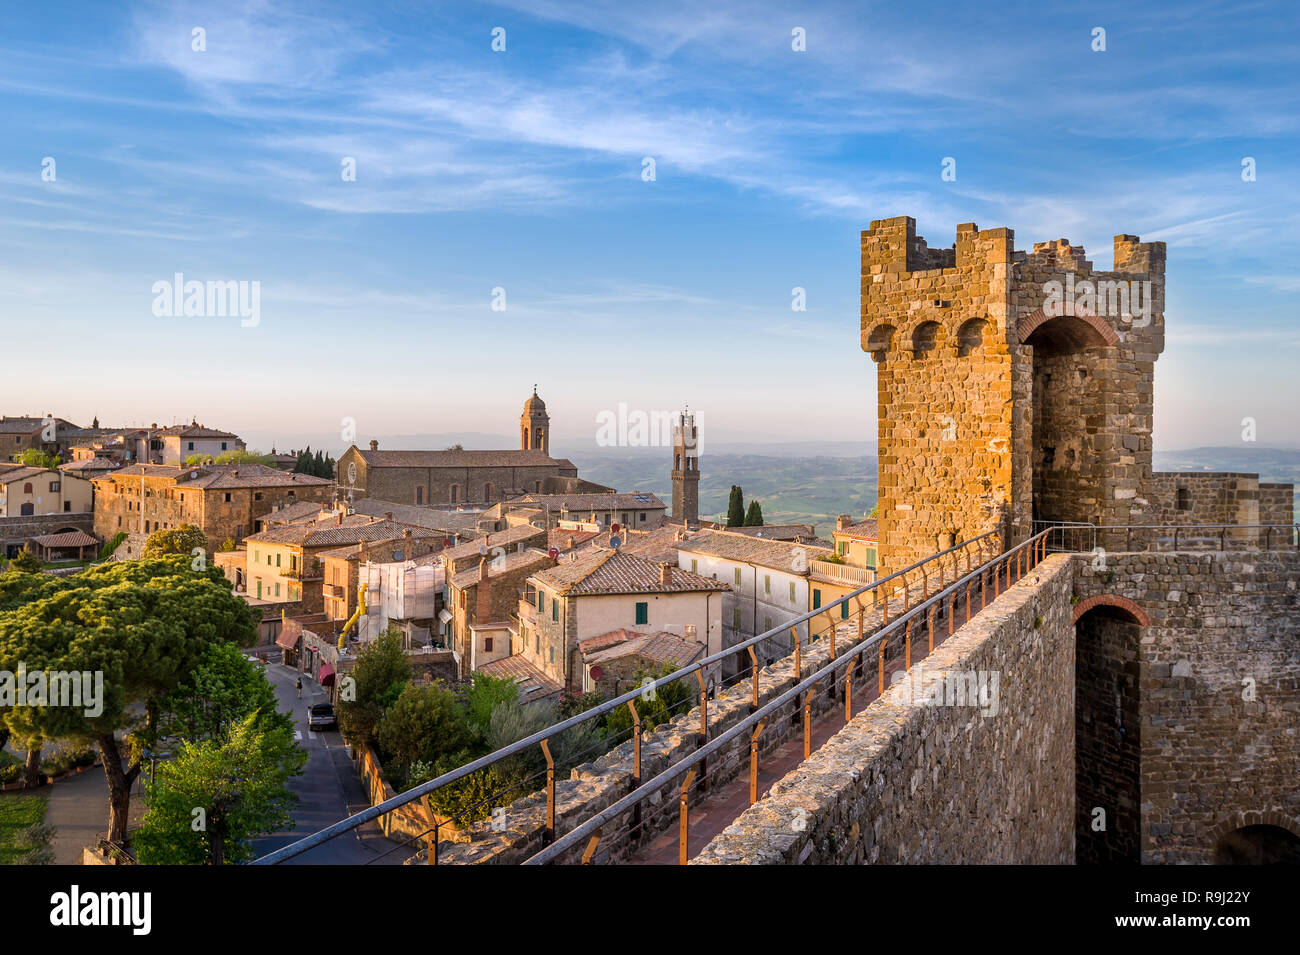 Medieval fortress wall view from the tower. Montalcino, Toscana region, Italy. Stock Photo